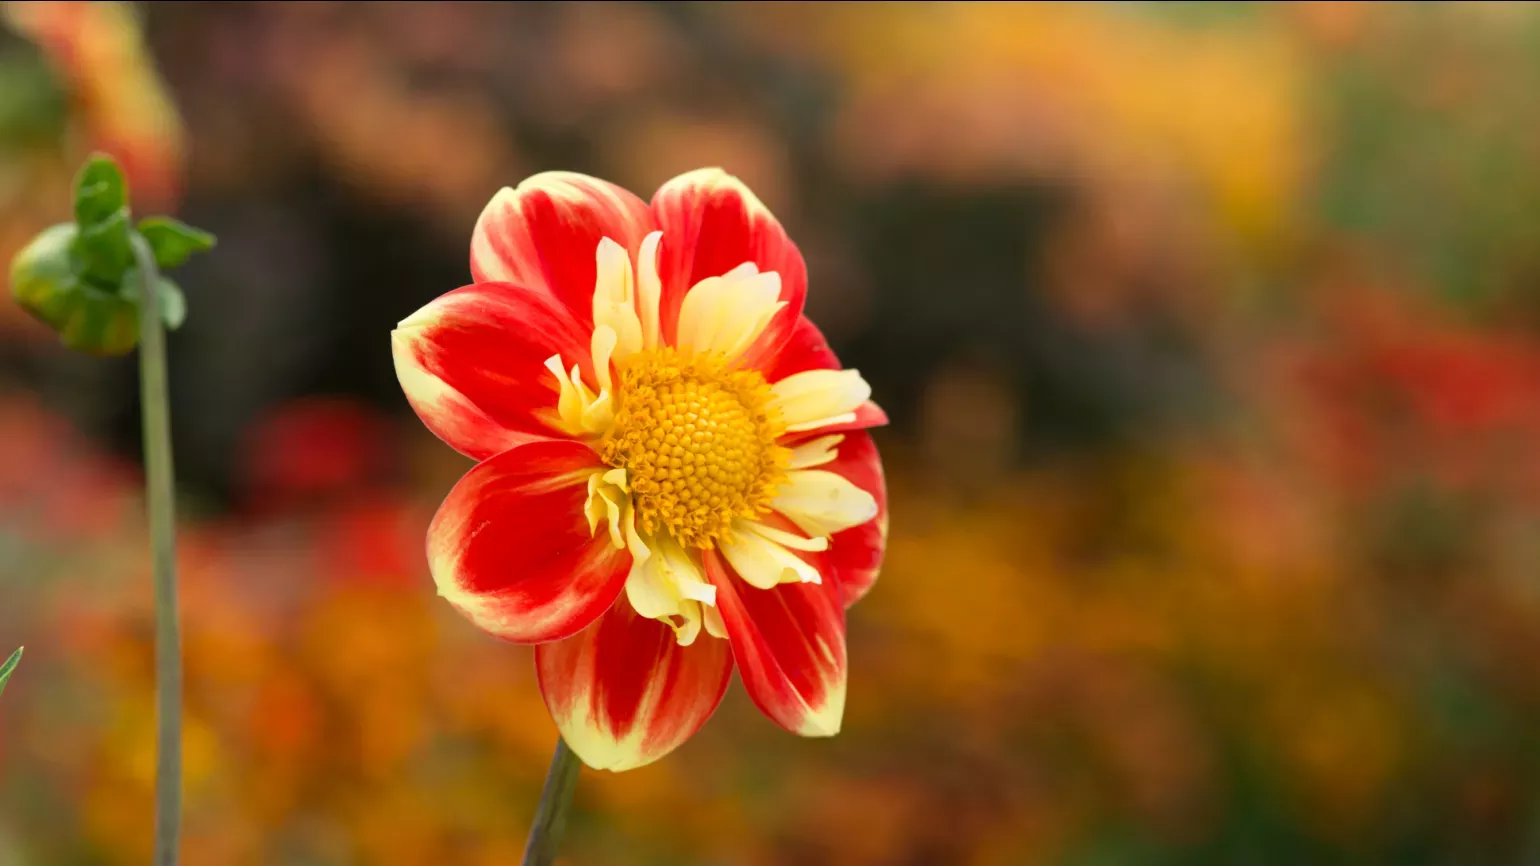 A bright red and yellow flower